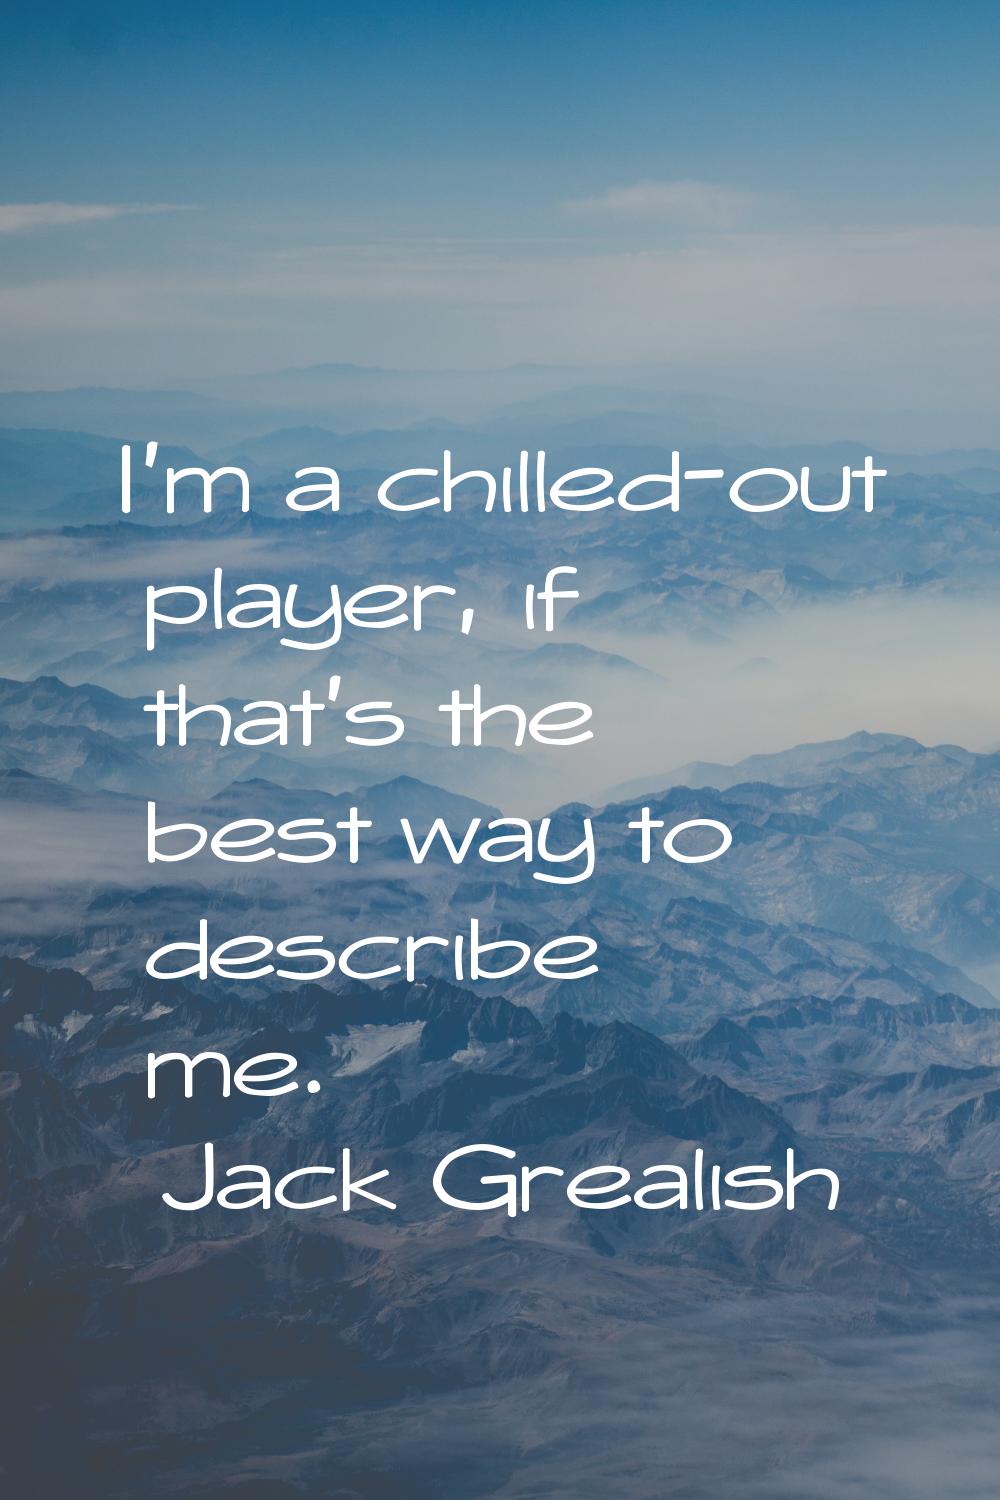 I'm a chilled-out player, if that's the best way to describe me.